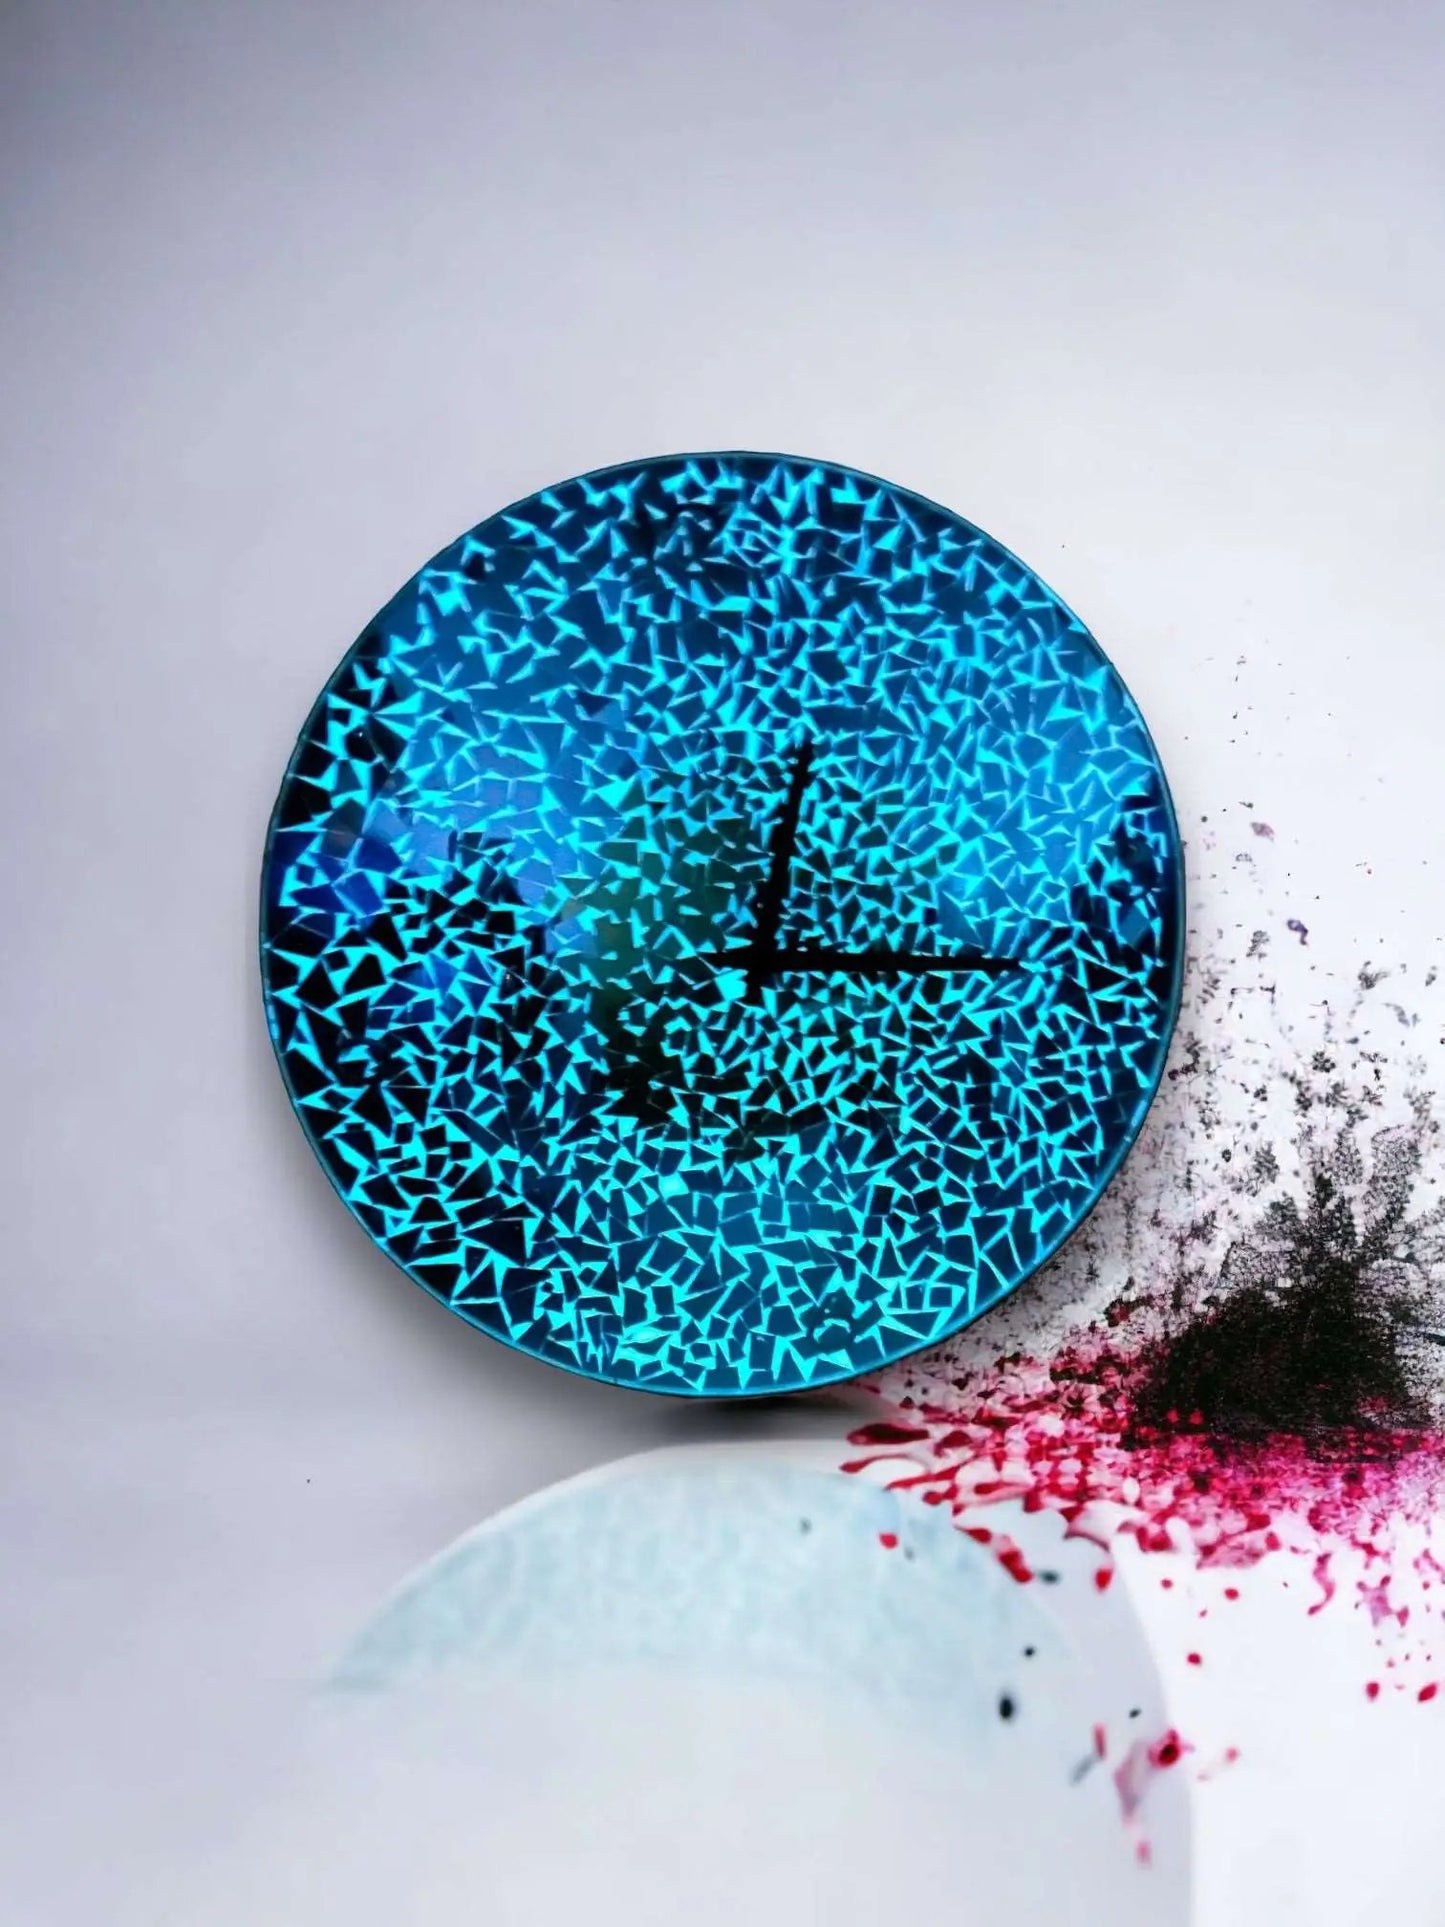 Glowing Epoxy Resin Mirror Wall Clock: A Timepiece That Shines Day and Night